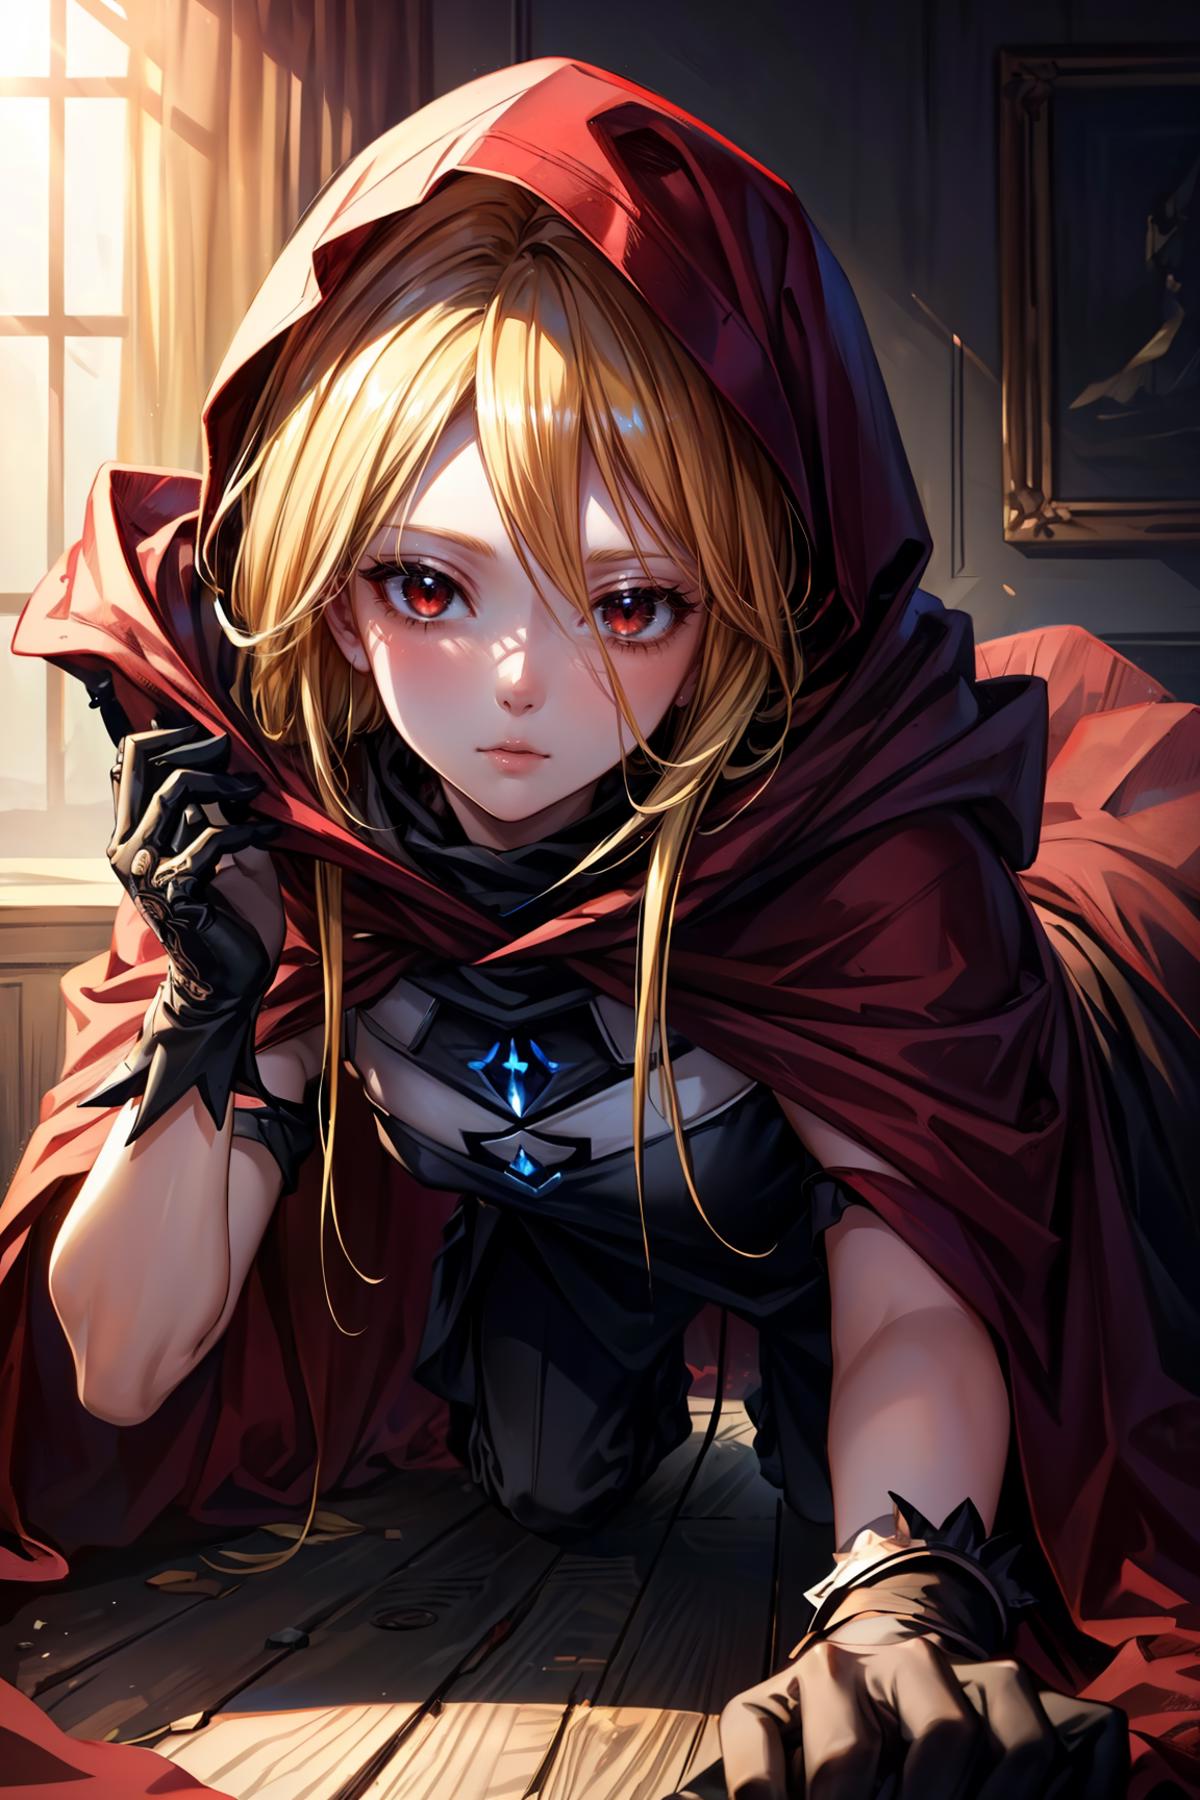 Evileye (Overlord) image by EcchiAngels